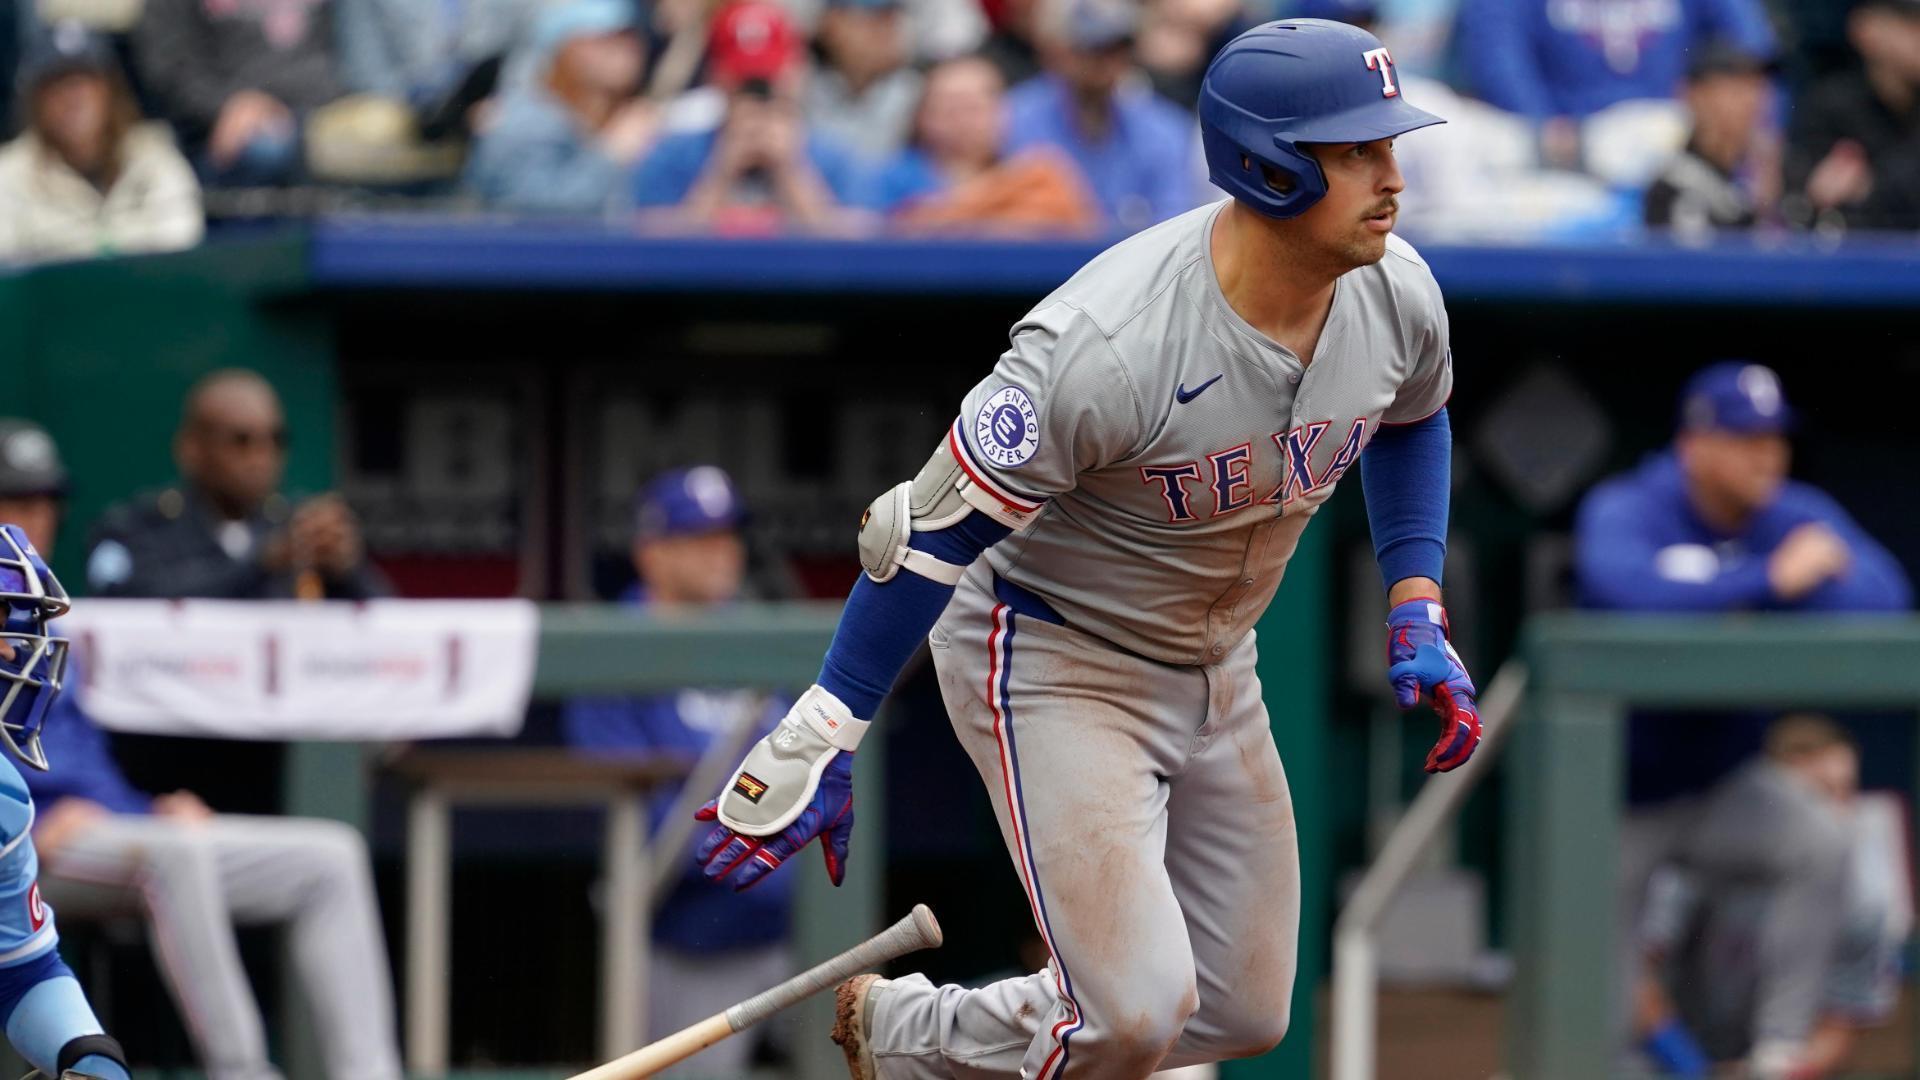 Rangers play the Royals after Lowe s 4-hit game